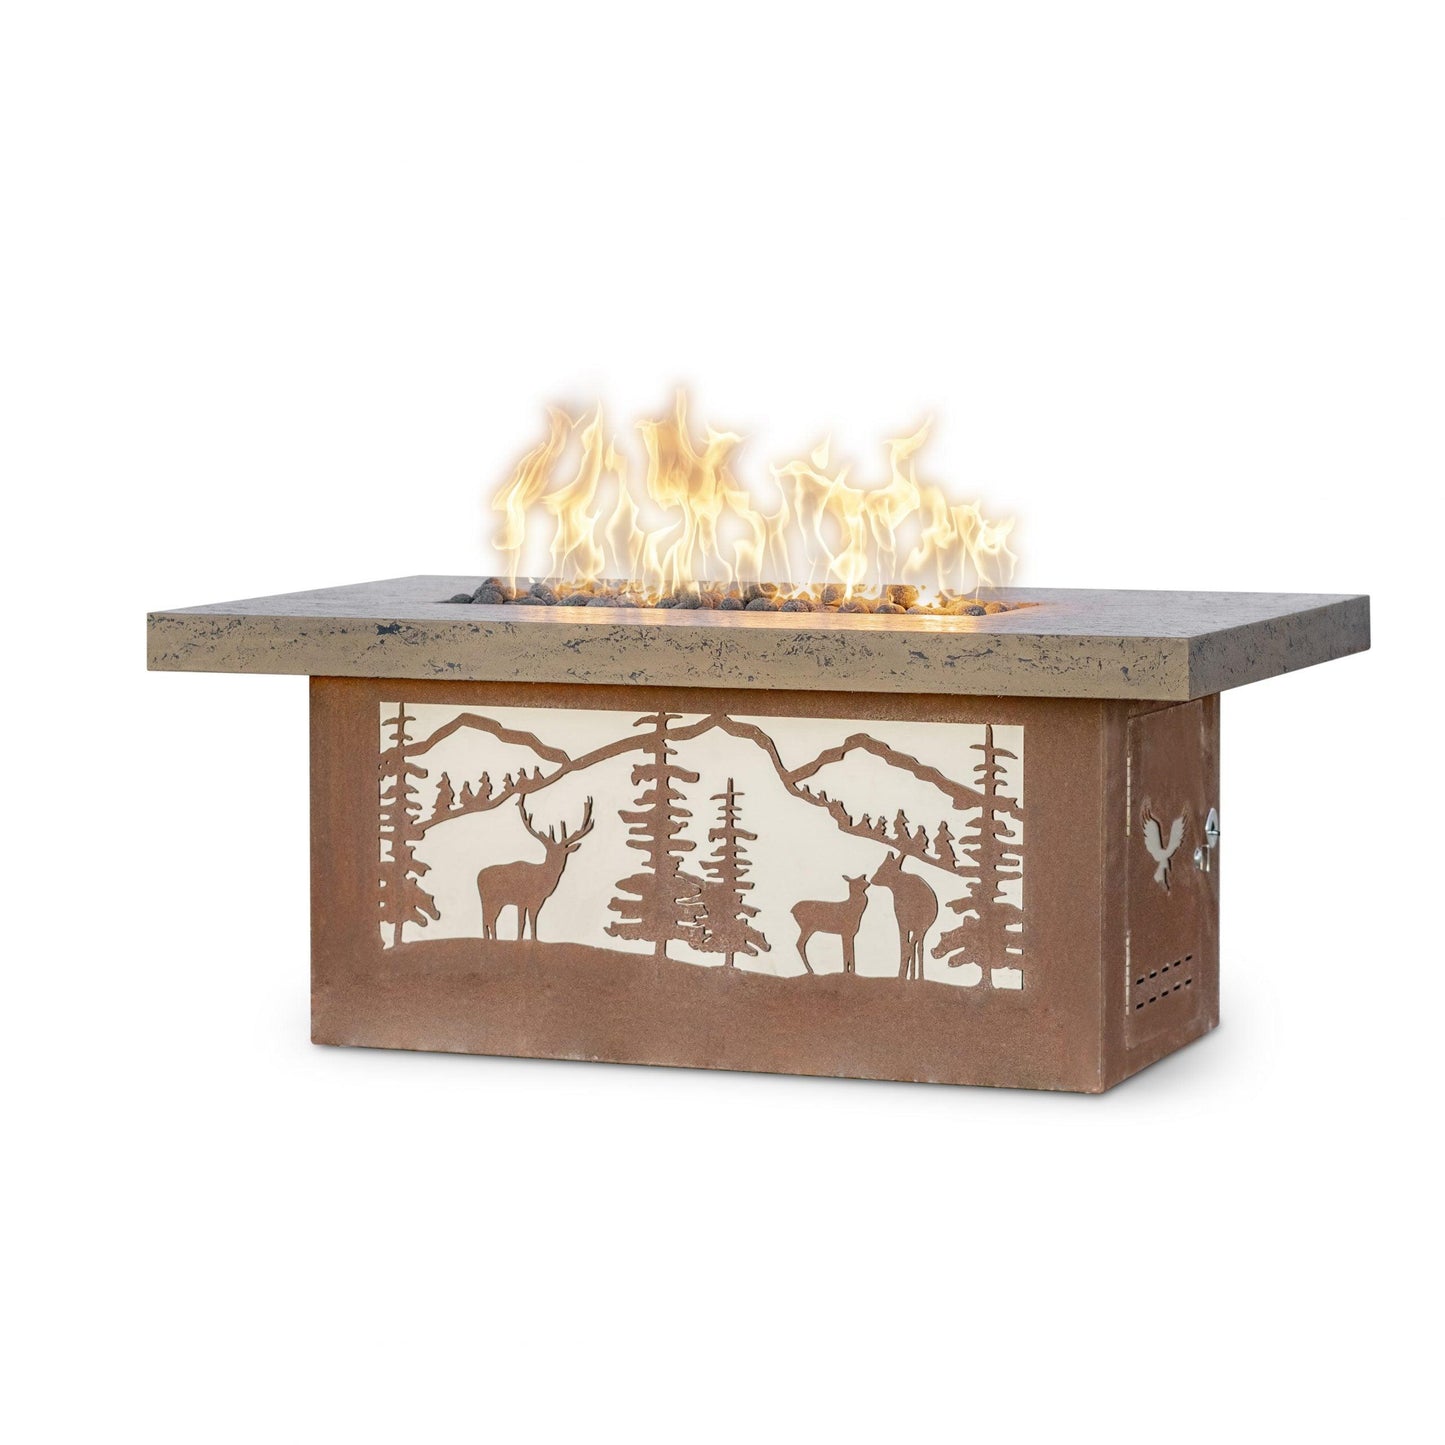 Outback Rectangaular Fire Pit Corten Steeel scaled